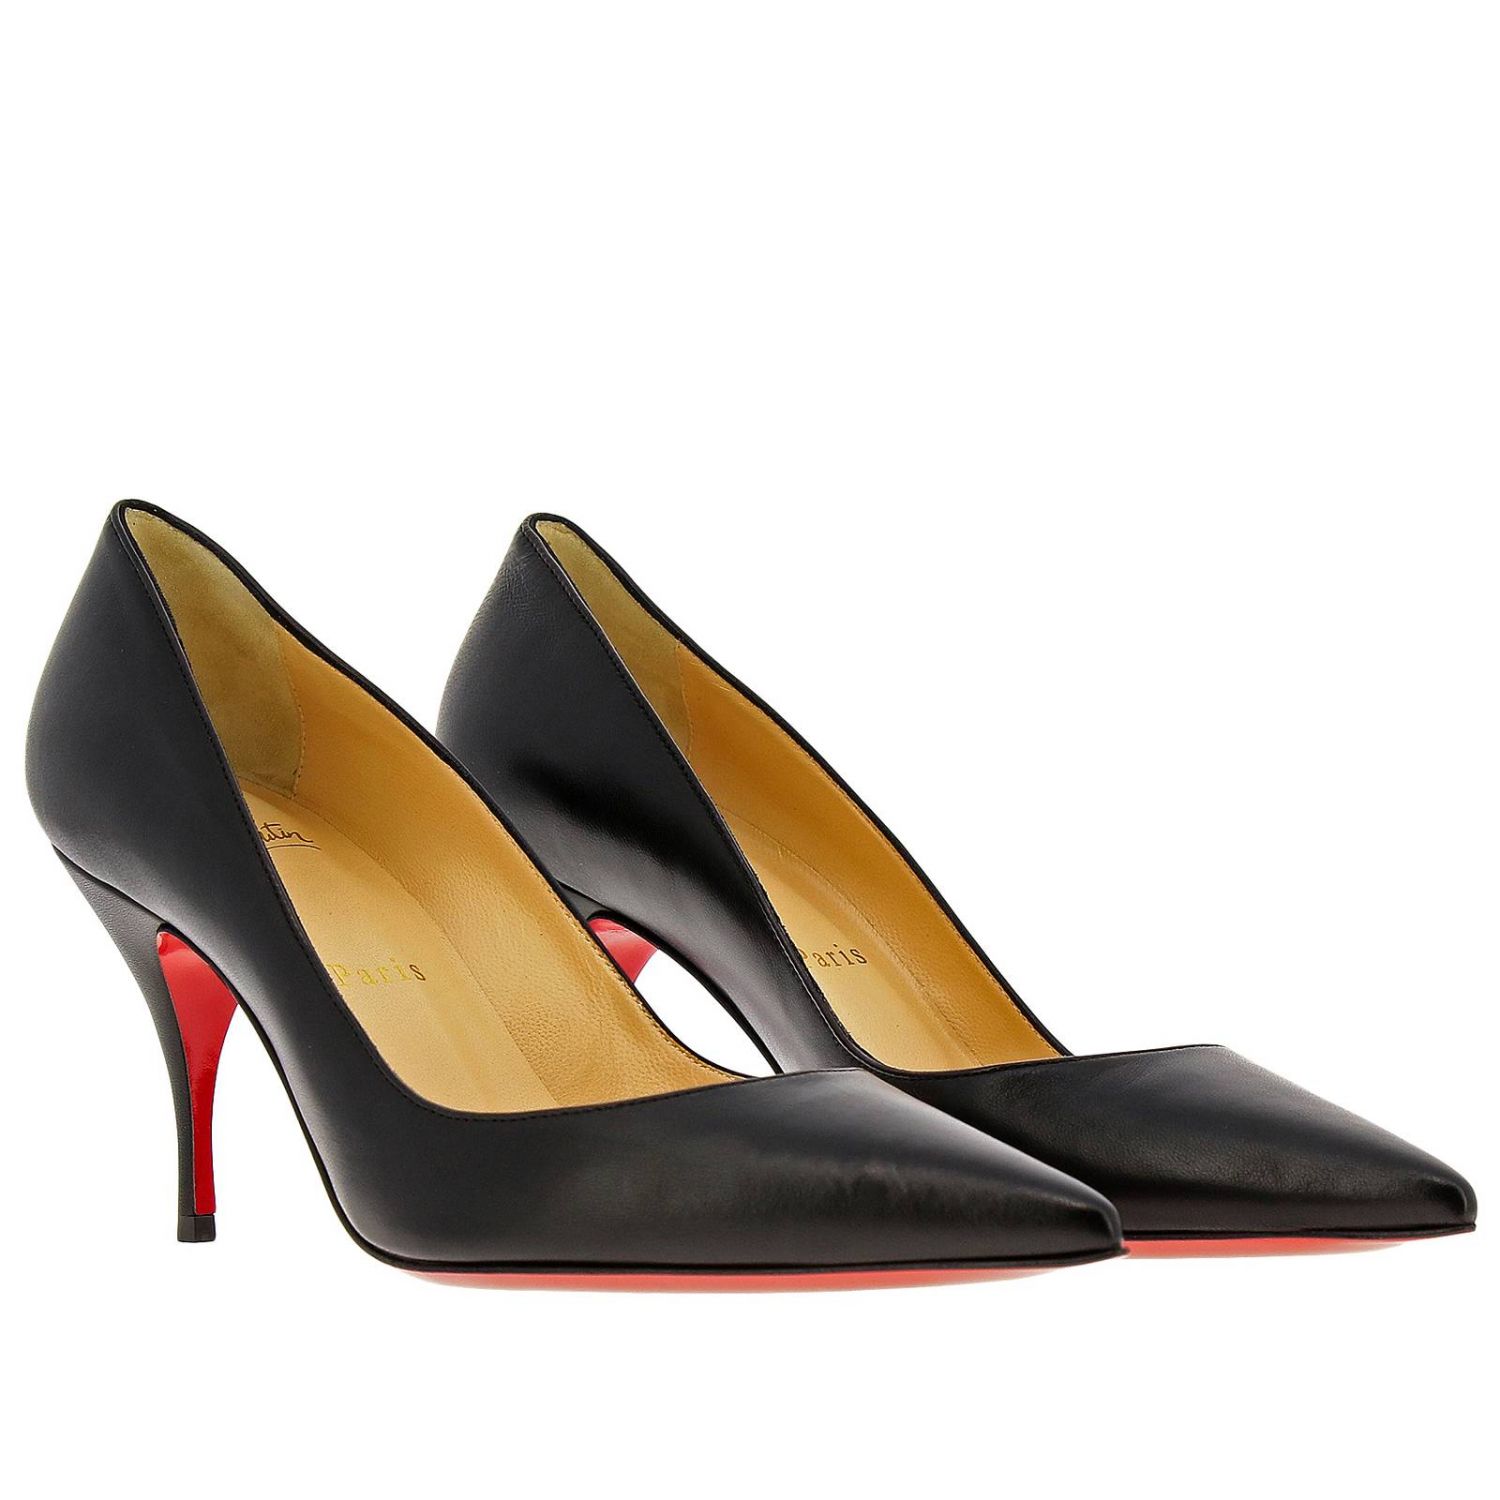 CHRISTIAN LOUBOUTIN: Clare décolleté in nappa leather | Pumps Christian ...